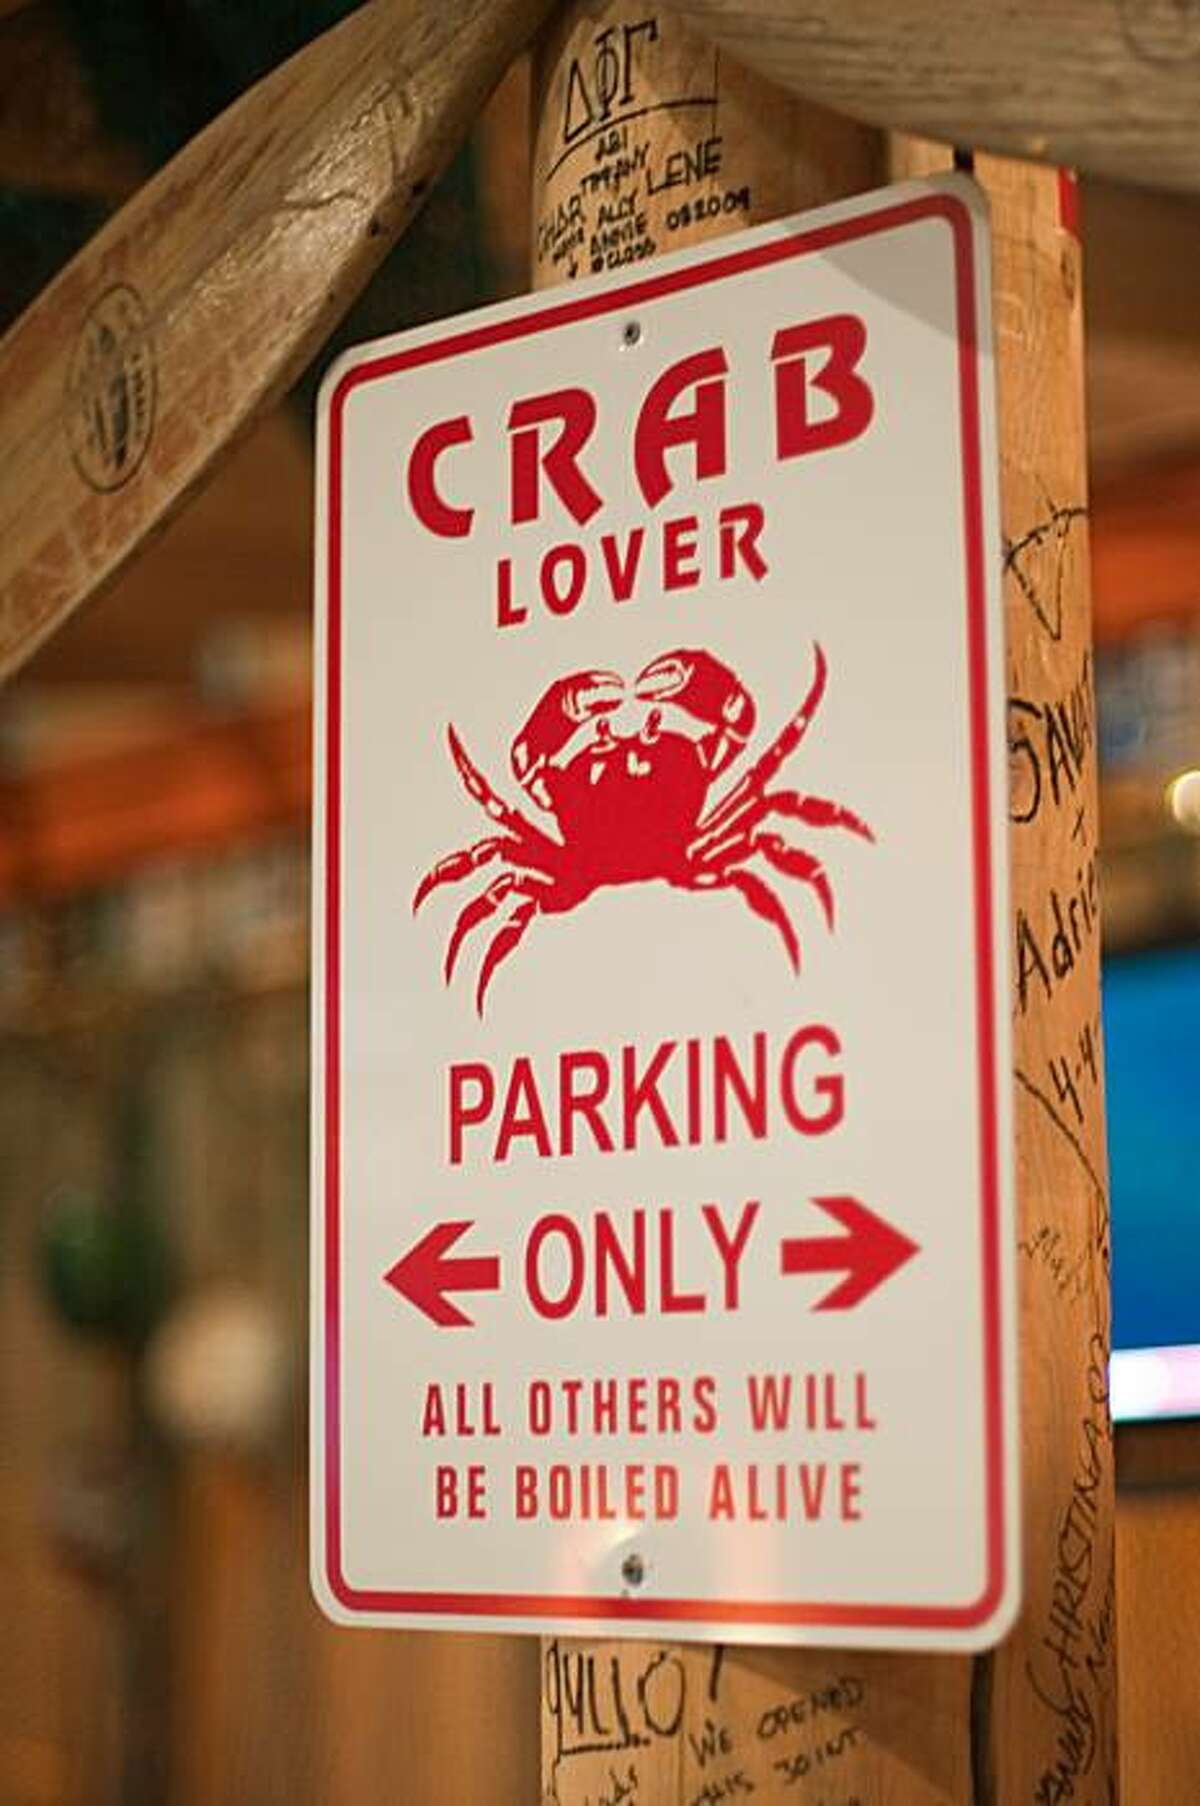 Details like this sign can be found throughout The Boiling Crab, adorning the walls and hanging from the ceiling.